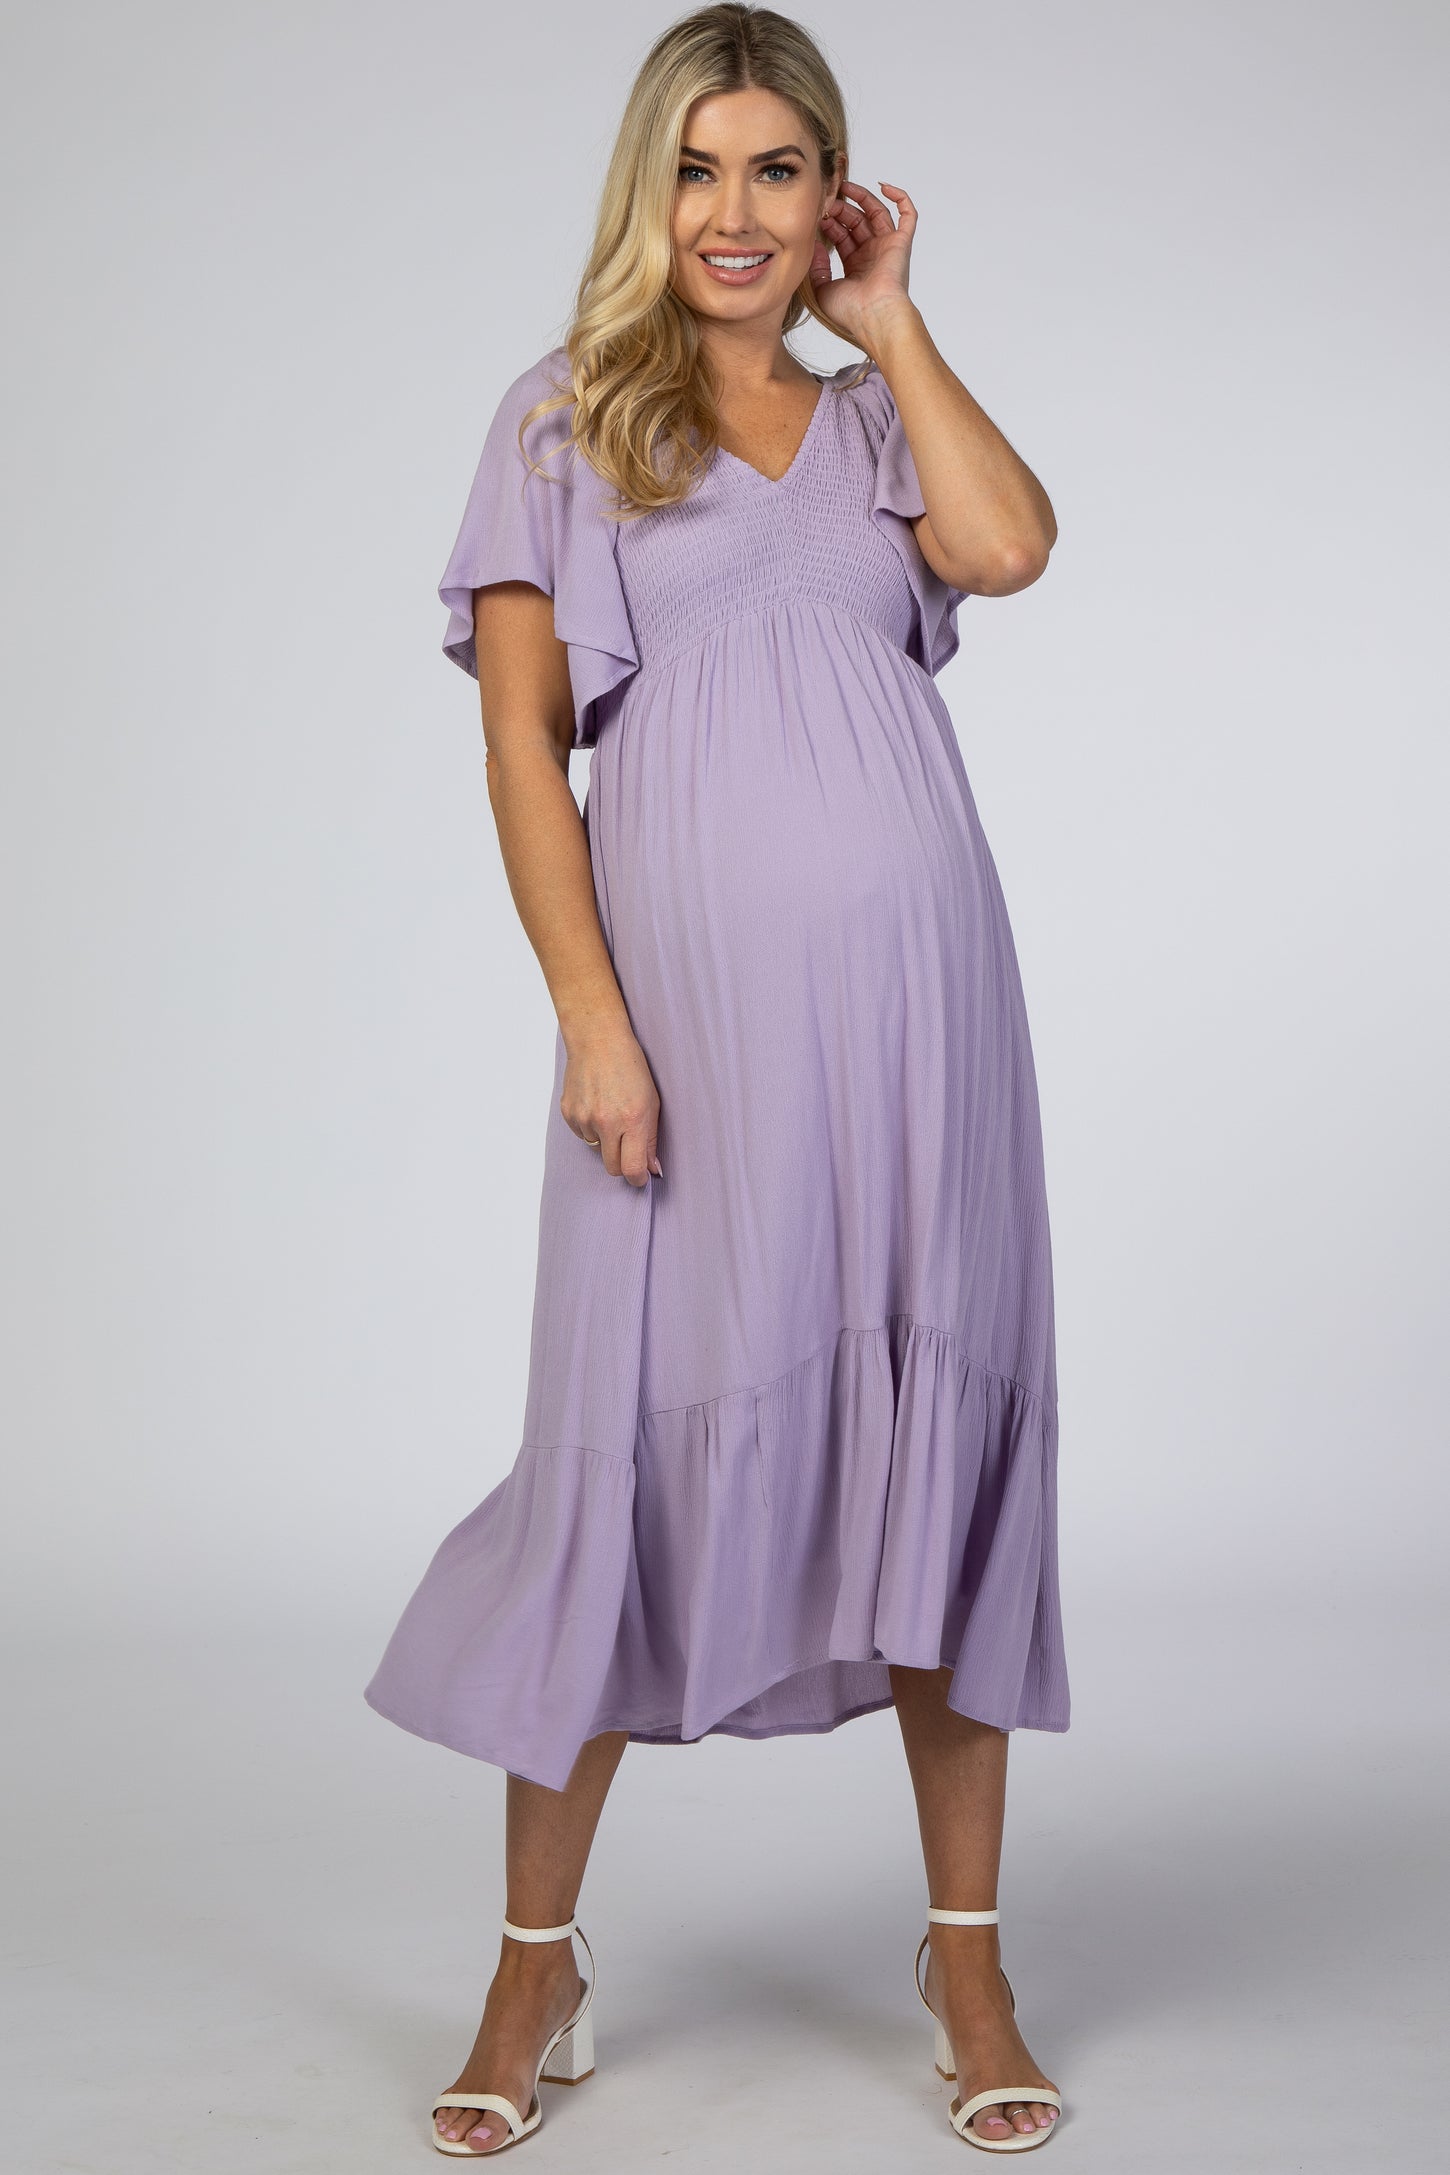 Romantic Purple Lace Lilac Infant Dress With Ruffles And Short